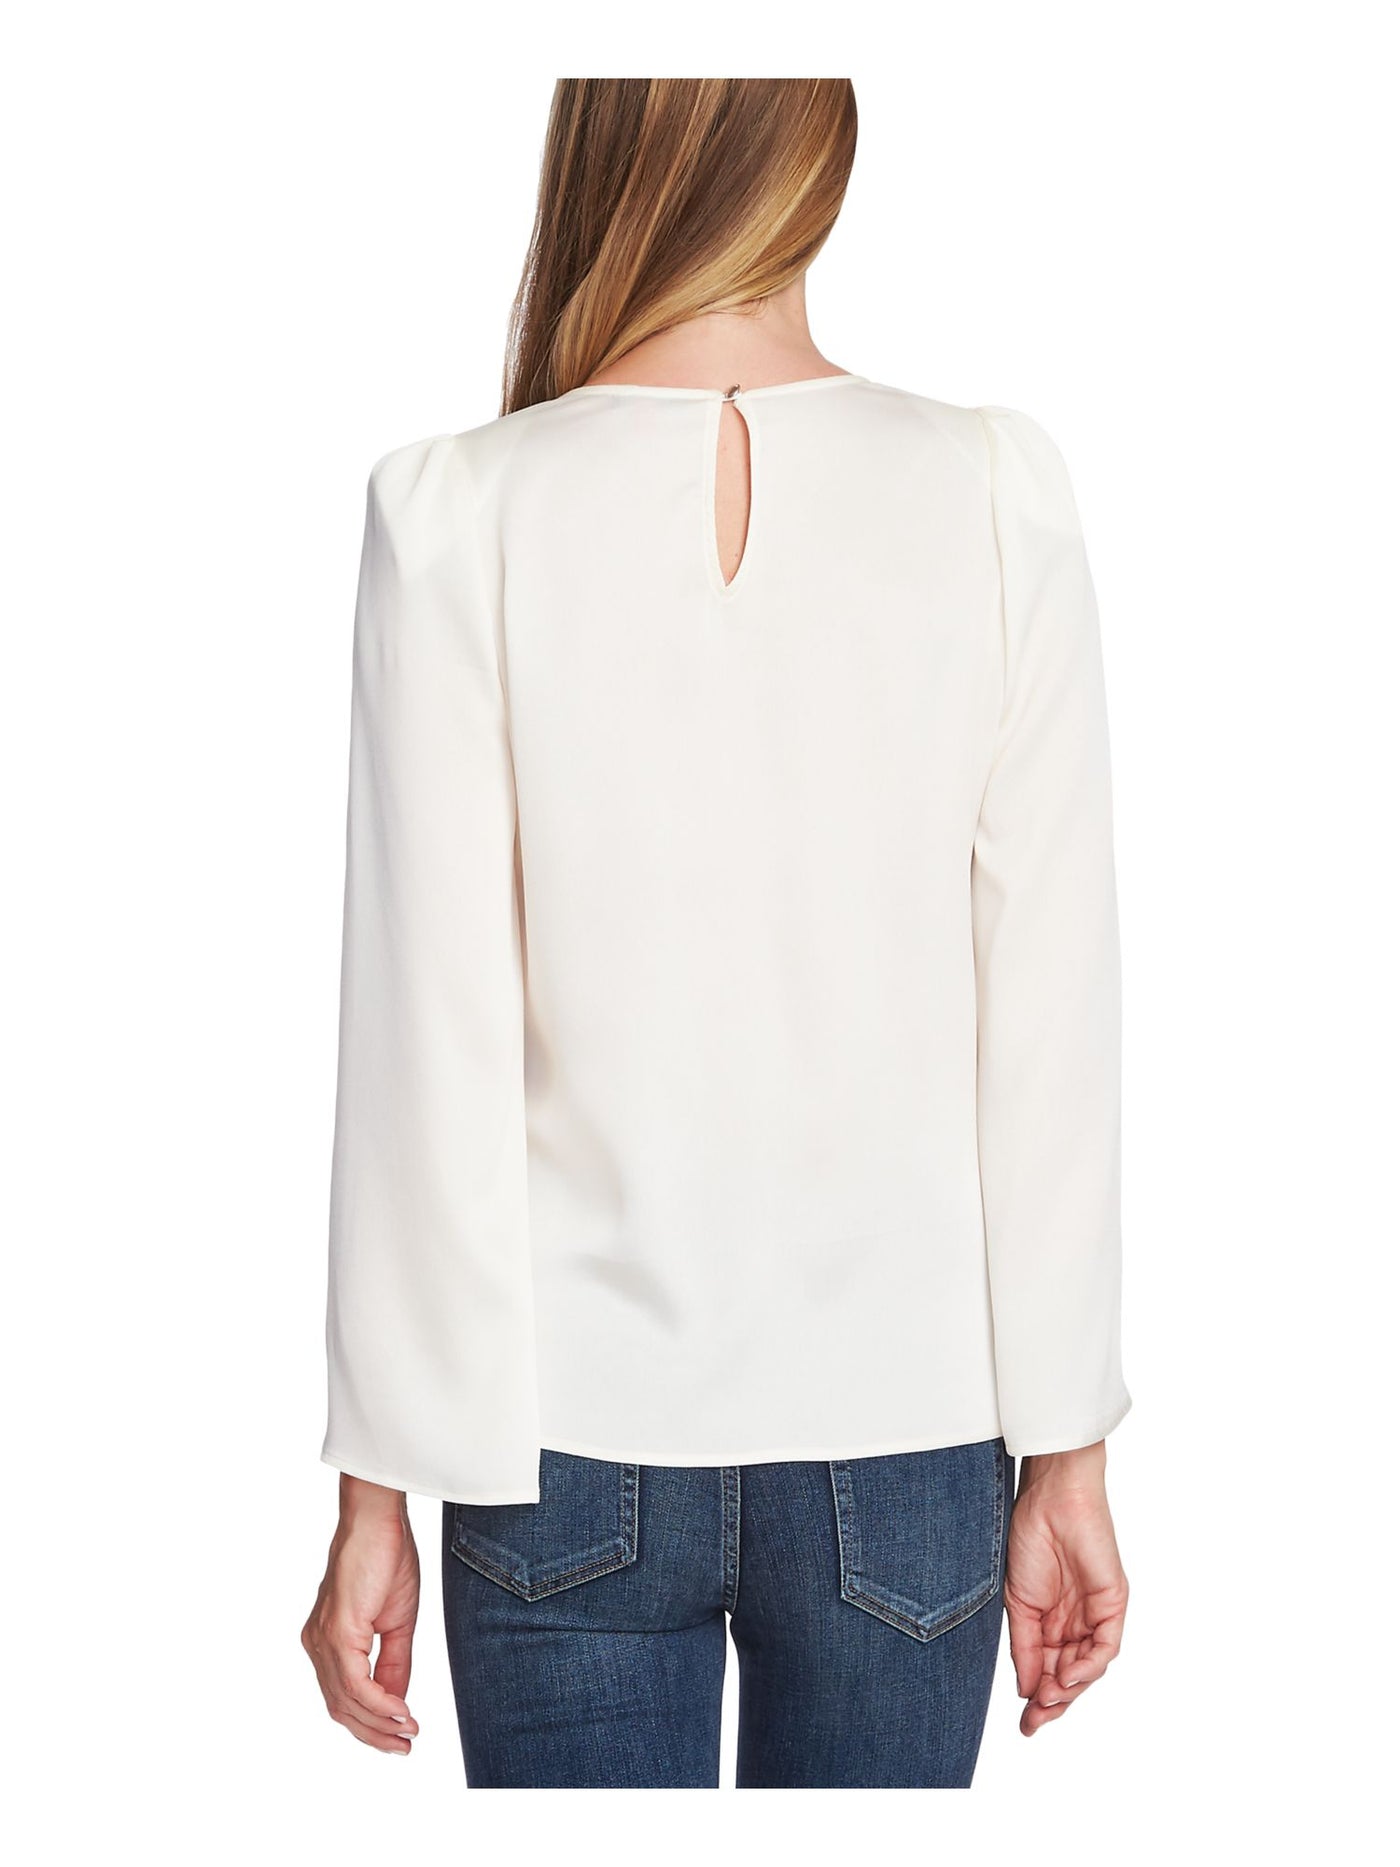 VINCE CAMUTO Womens Ivory Long Sleeve Crew Neck Blouse XS